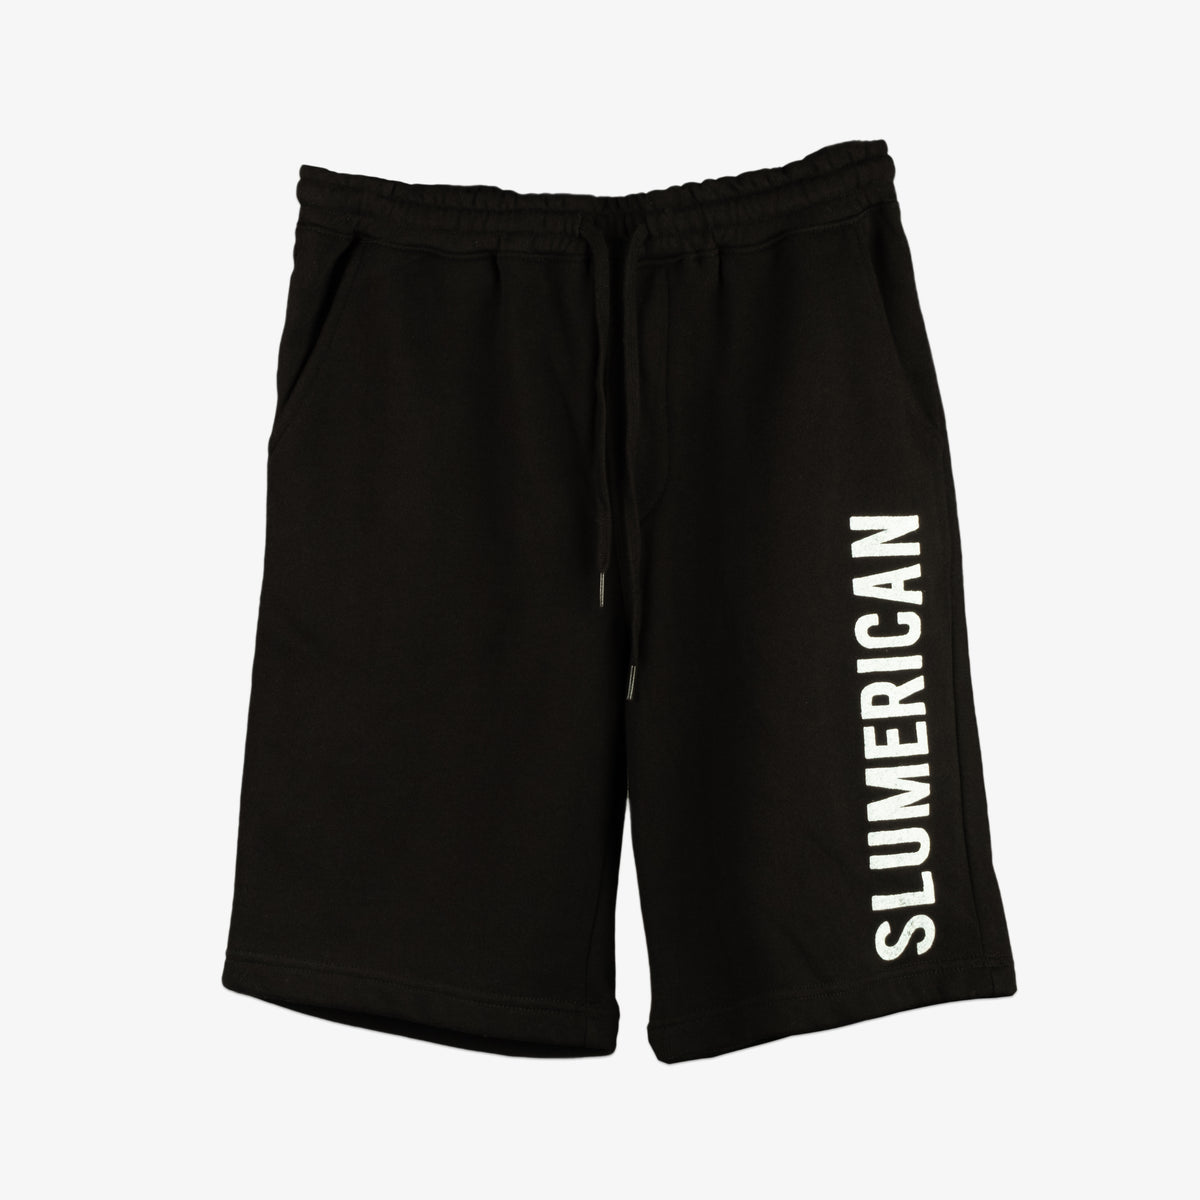 WINGED Shorts are new and online now! Front printed fleece with our Winged  hit on the left leg, in stock today at Slumerican.com #slumerican